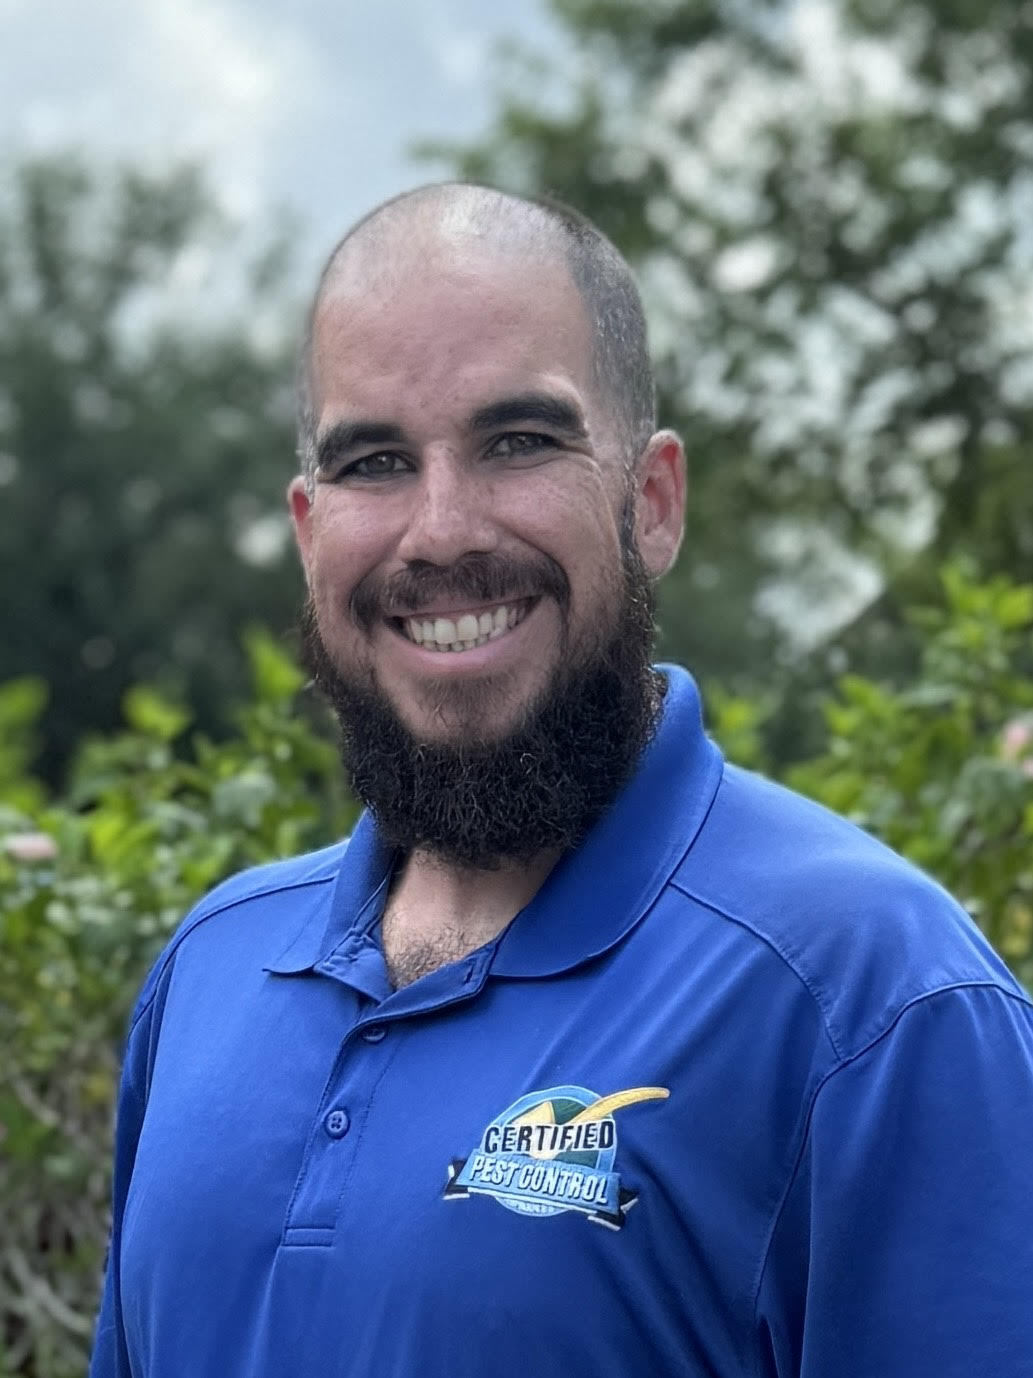 Sean Velez, Service Manager of Certified Pest Control